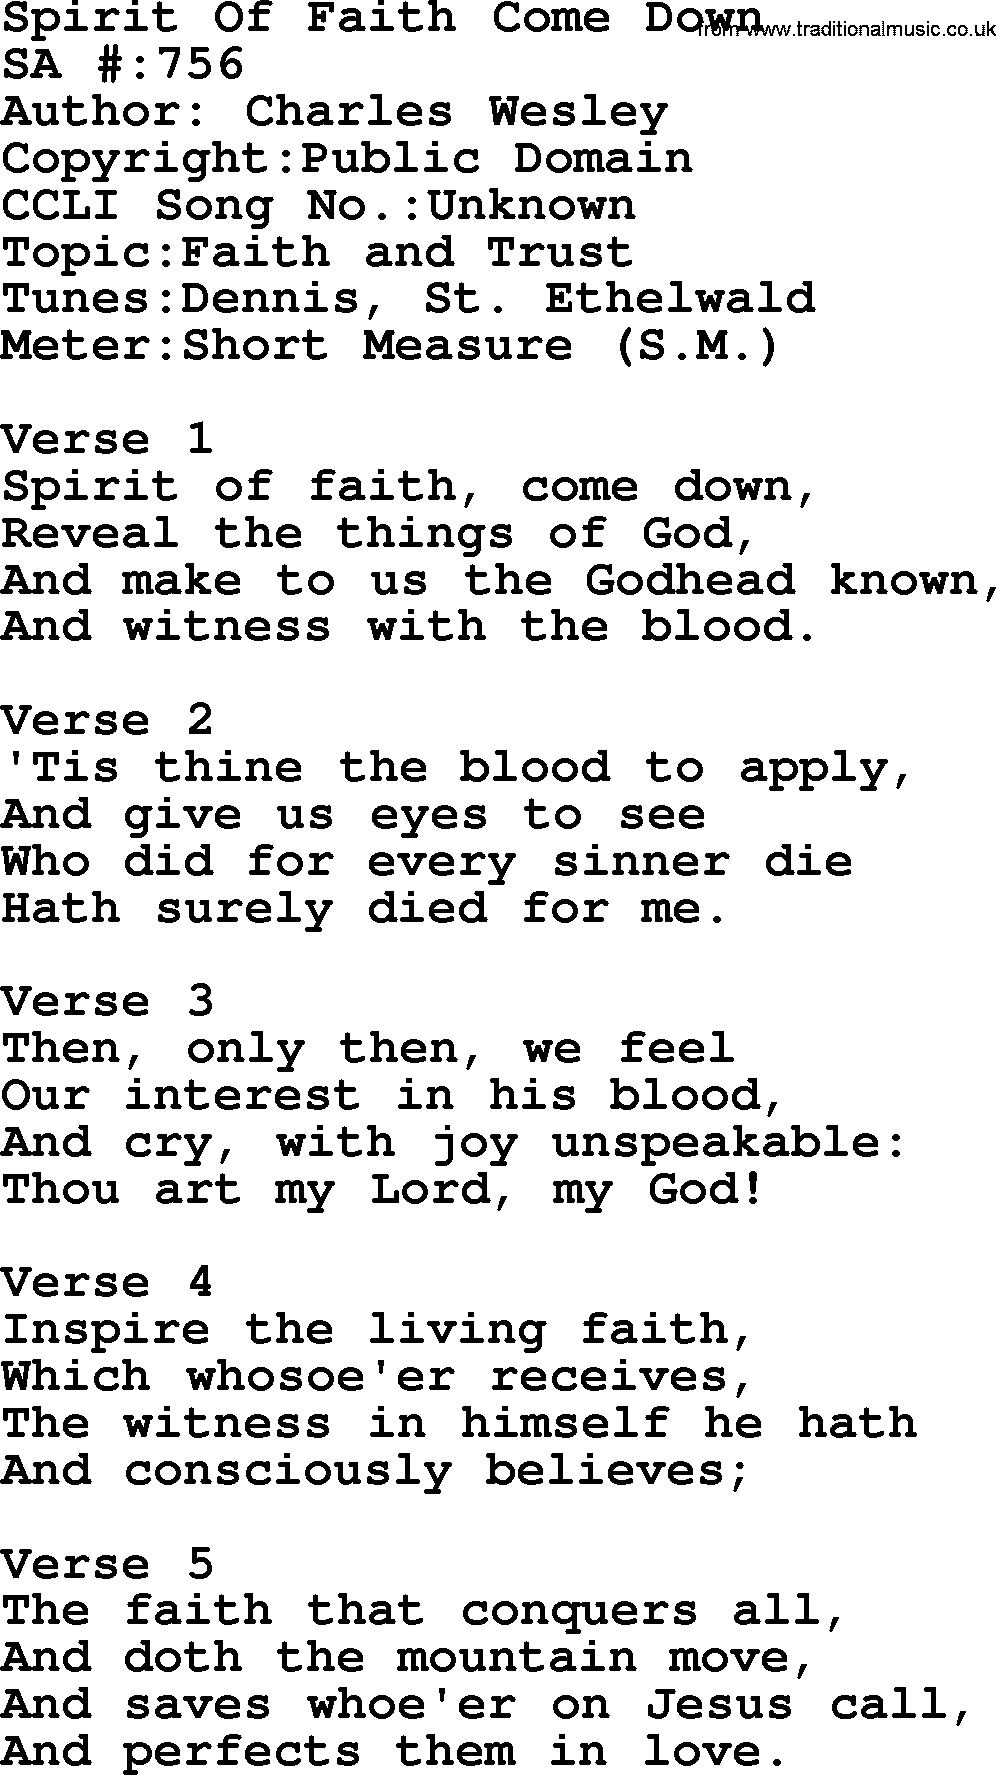 Salvation Army Hymnal, title: Spirit Of Faith Come Down, with lyrics and PDF,